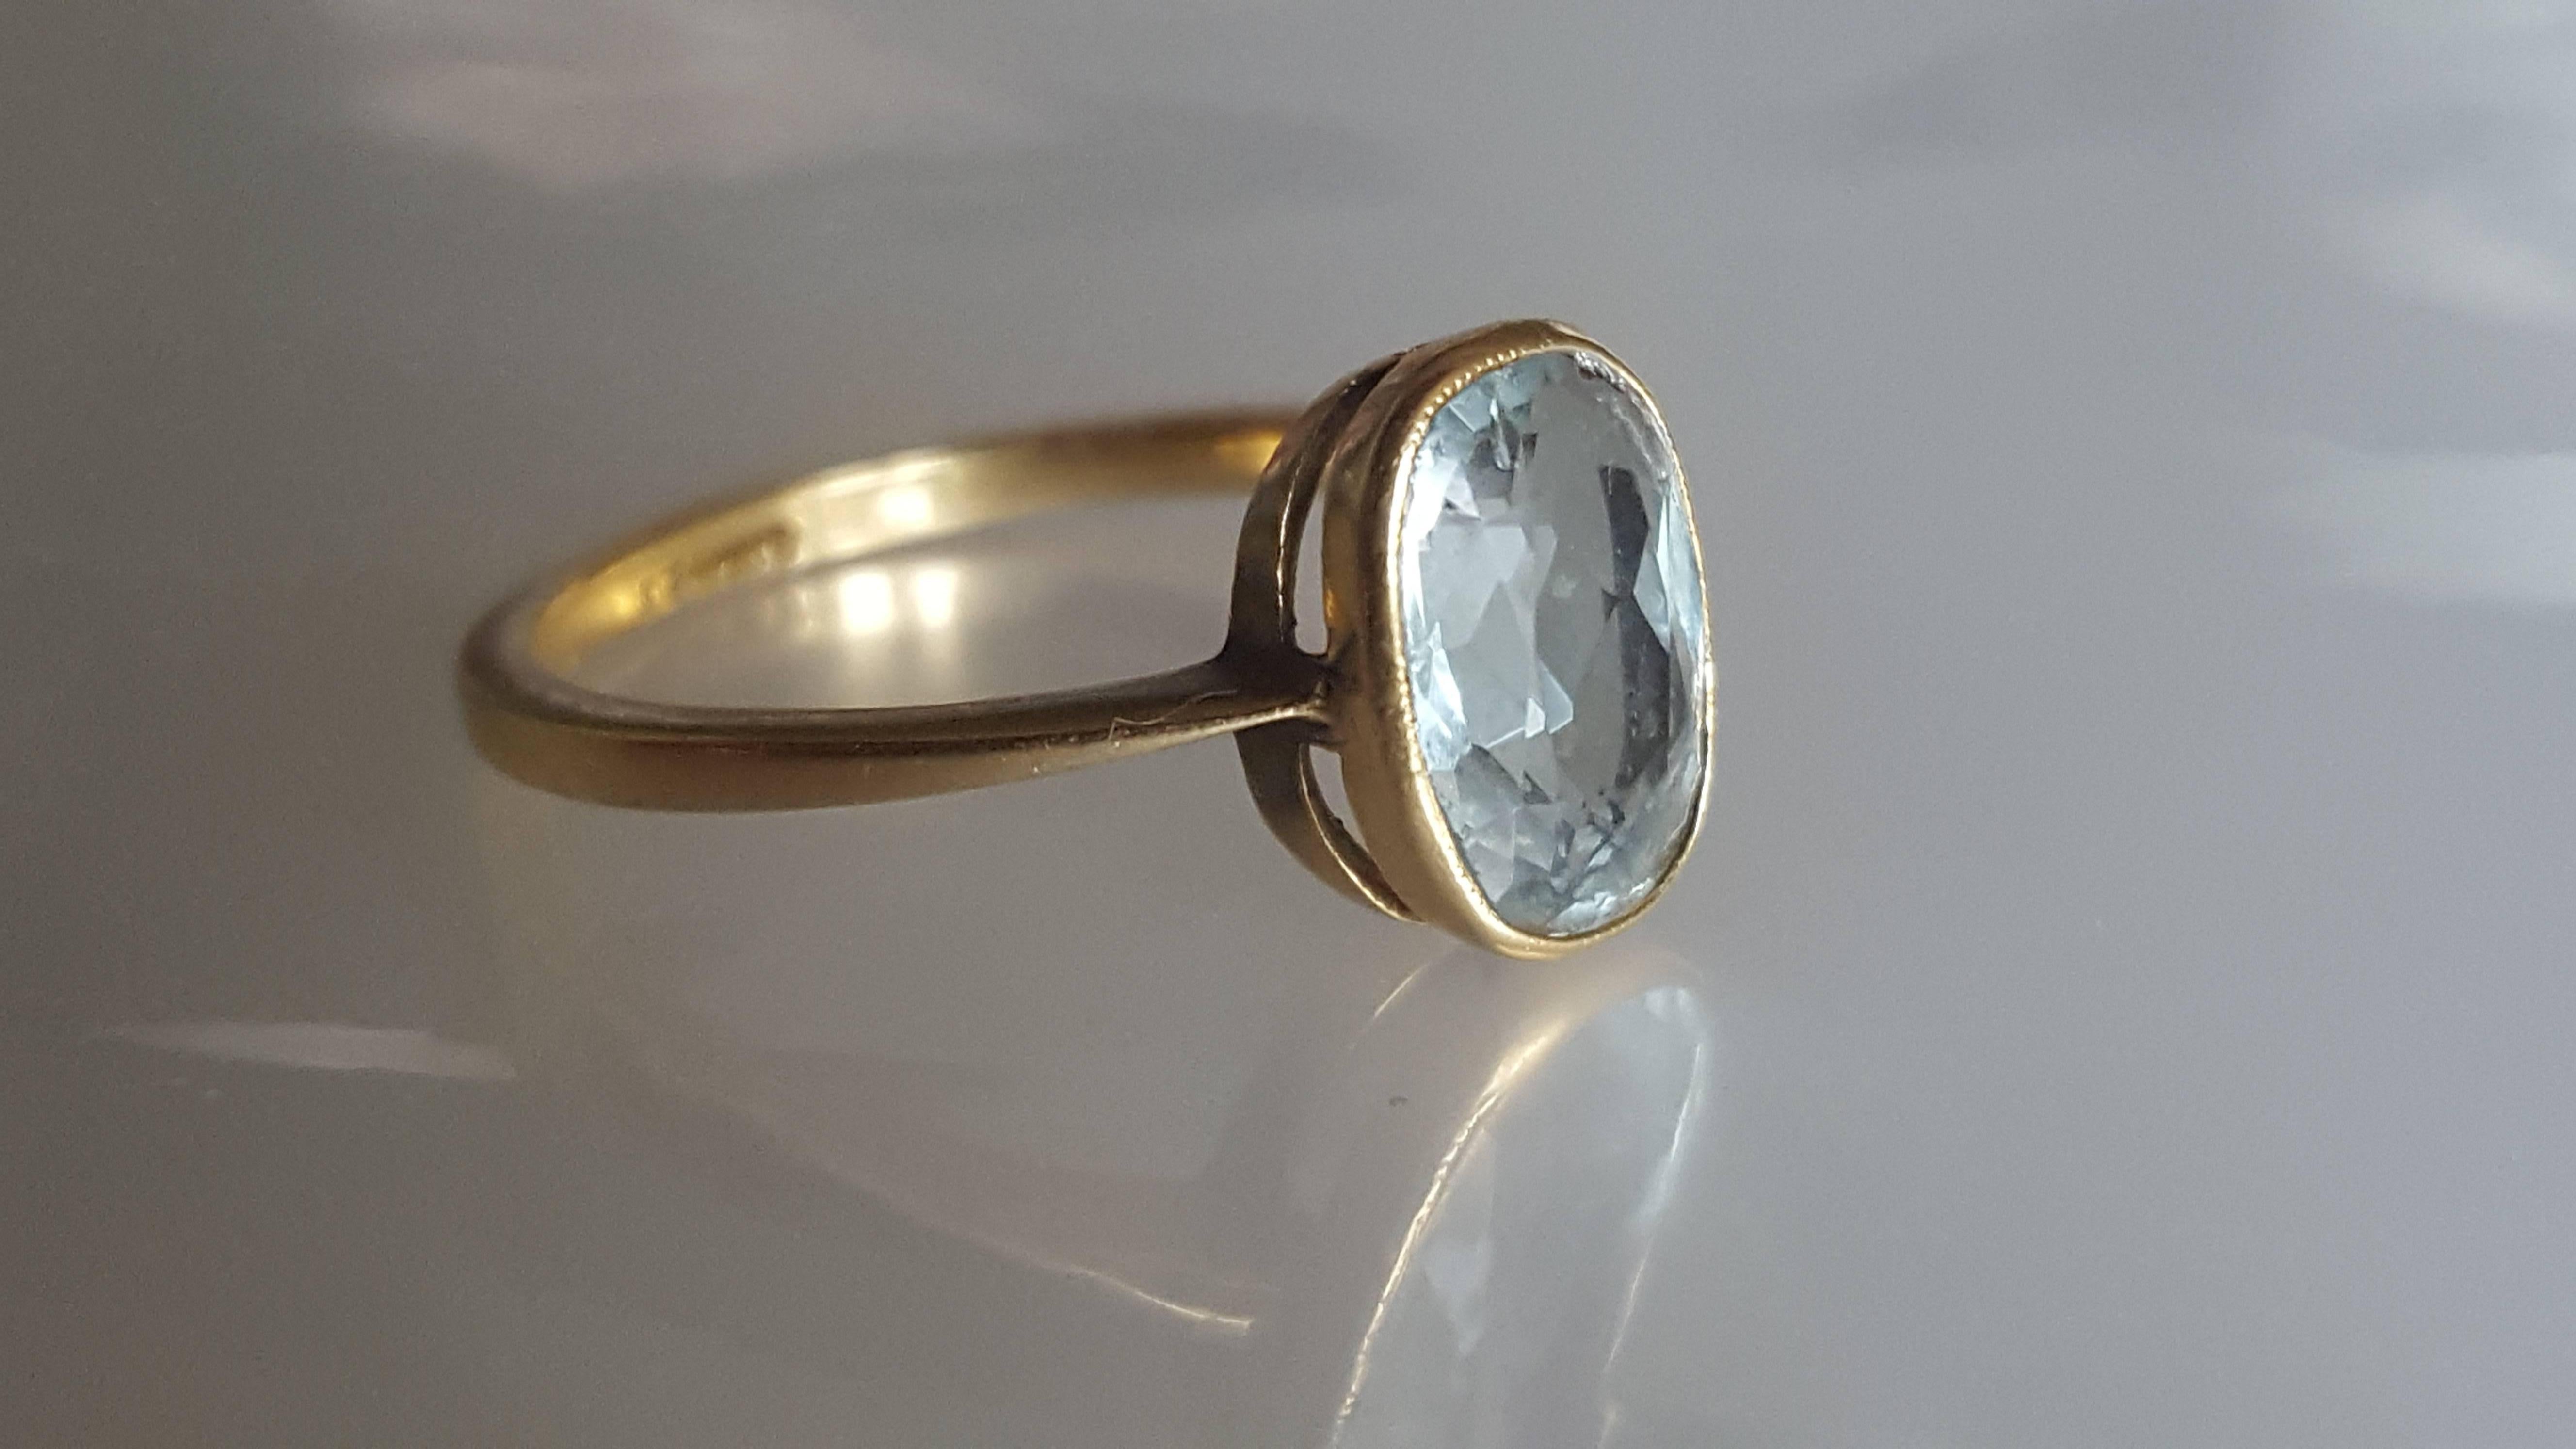 A Beautiful Edwardian era 18 Carat Gold and Aquamarine solitaire ring. Perfect as everyday ring. English origin. 
Size L UK, 6 US can be sized. 
Aquamarine 9mm x 7mm approx 1.4 Carat. 
Marked for 18 Carat Gold, also tested for 18 Carat. 
